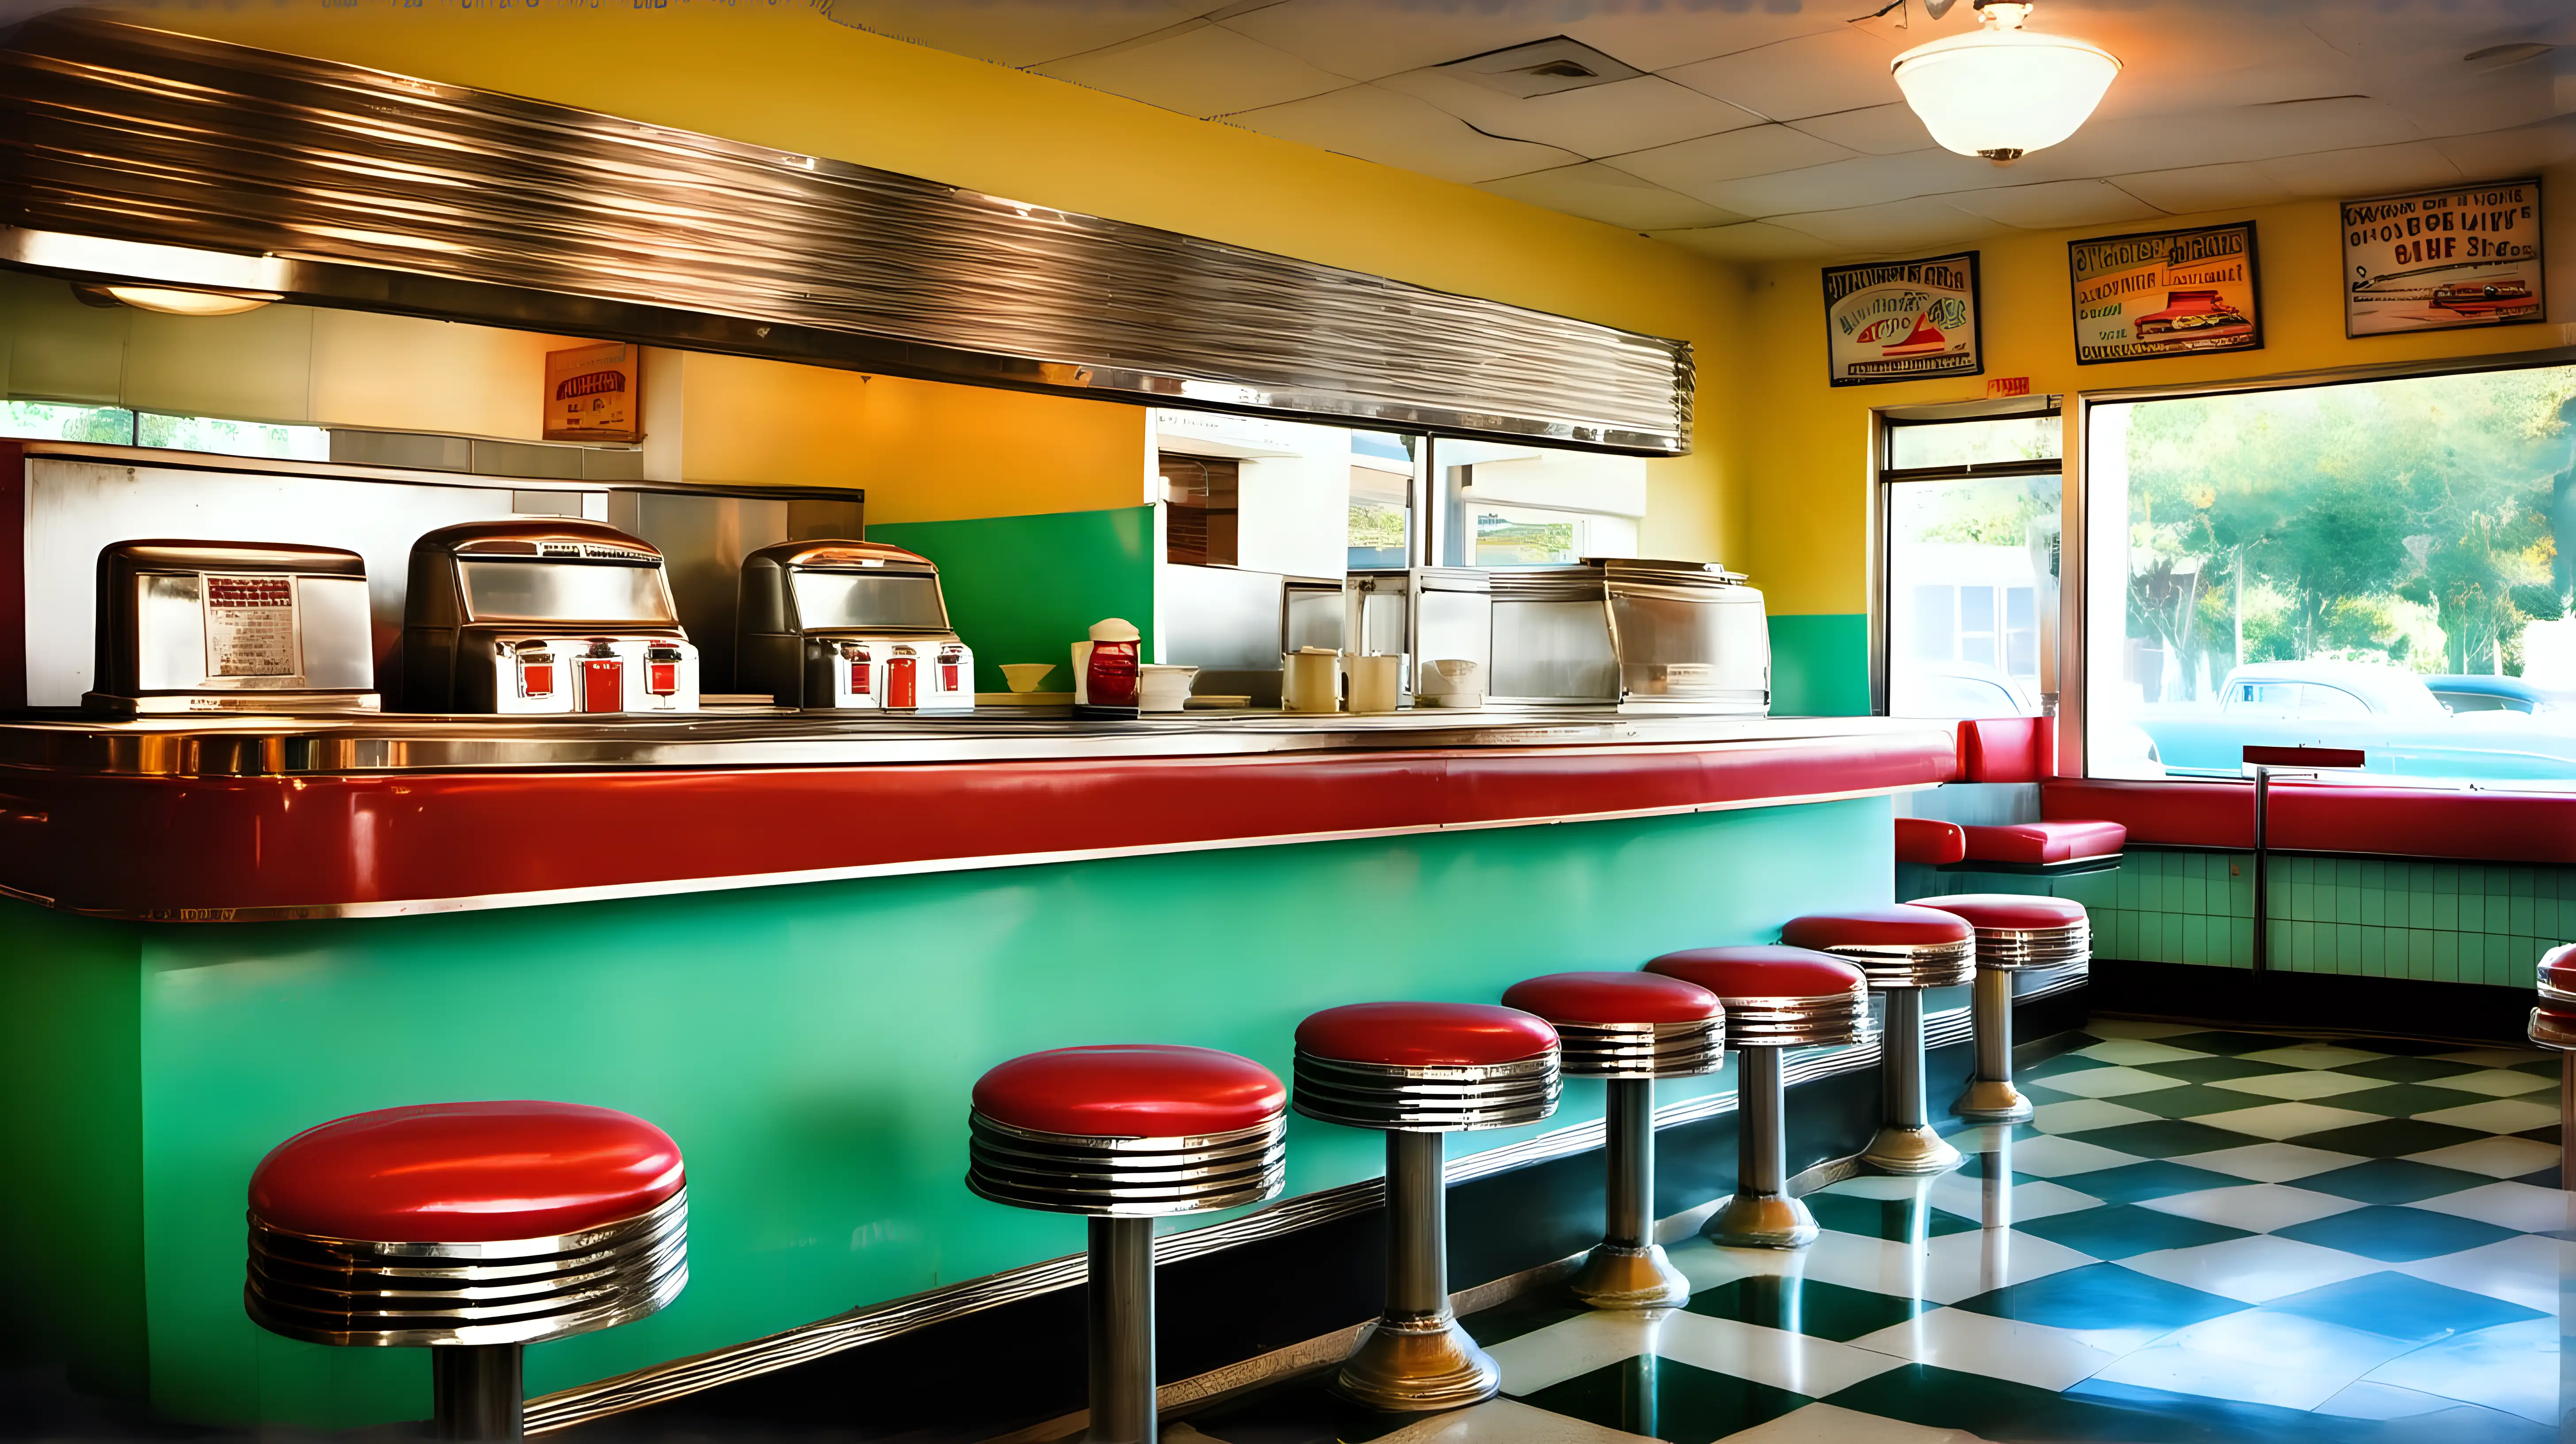 An empty 1950's diner counter, bright colors, photographic quality.